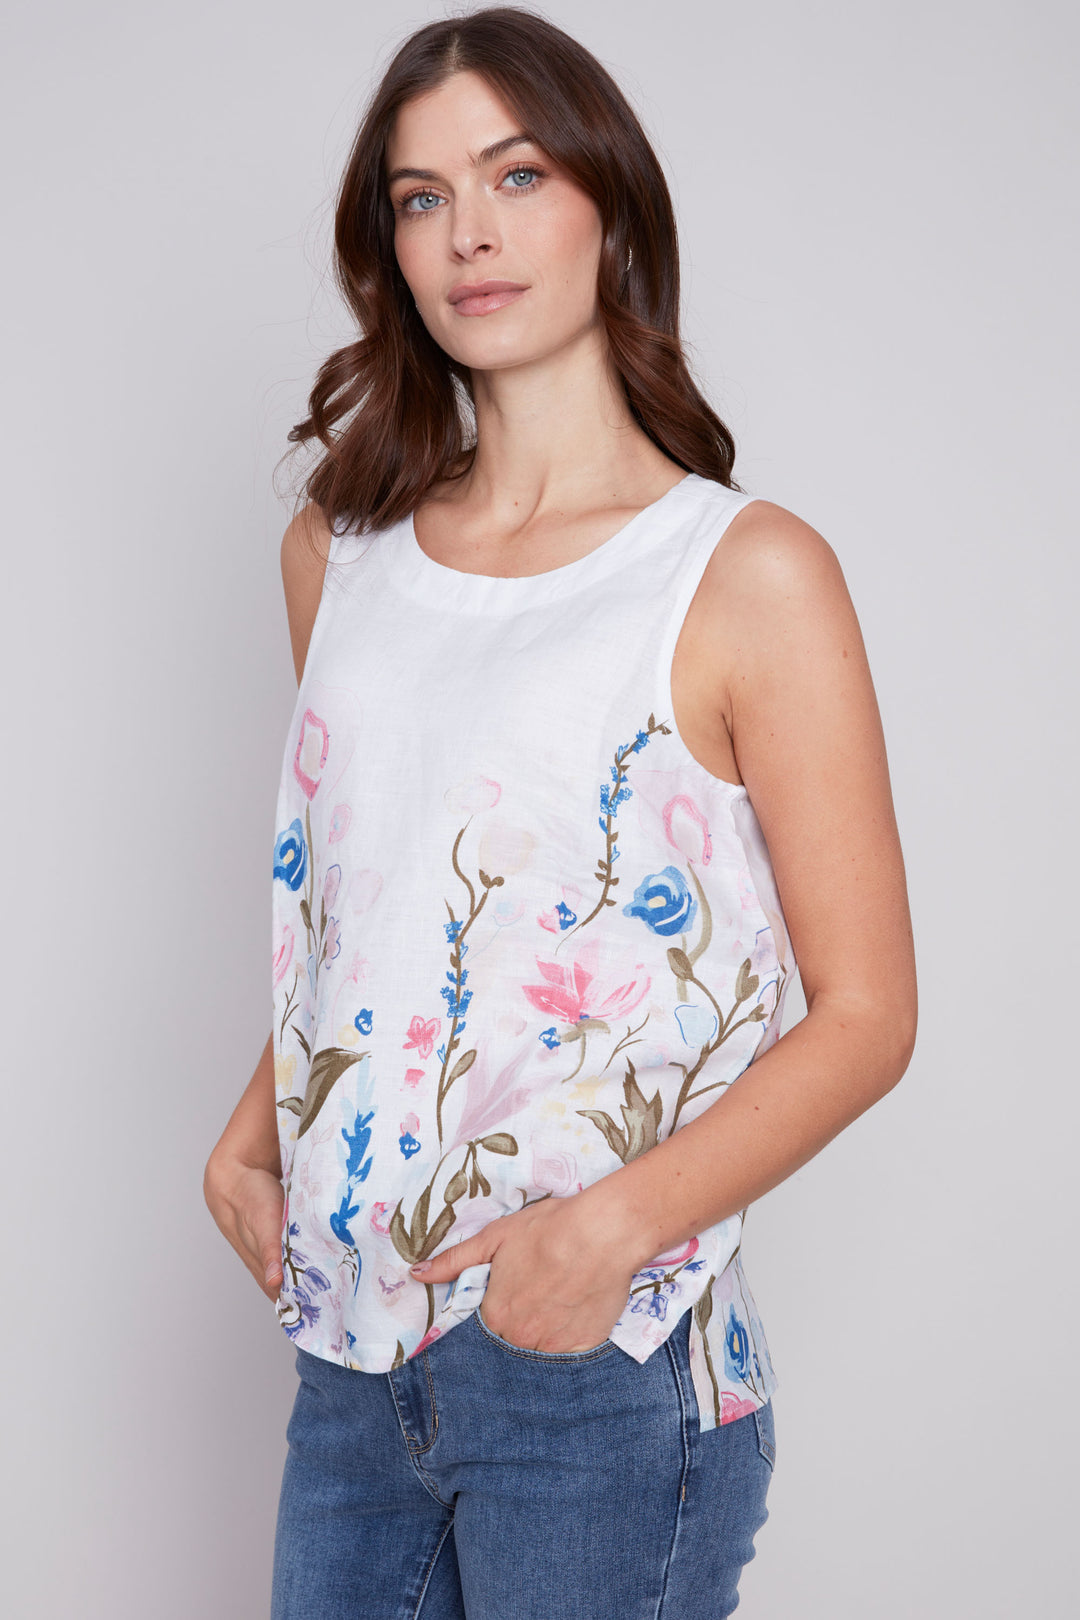 This lovely top features a colourful floral print and sleeveless design, perfect for warmer weather. 